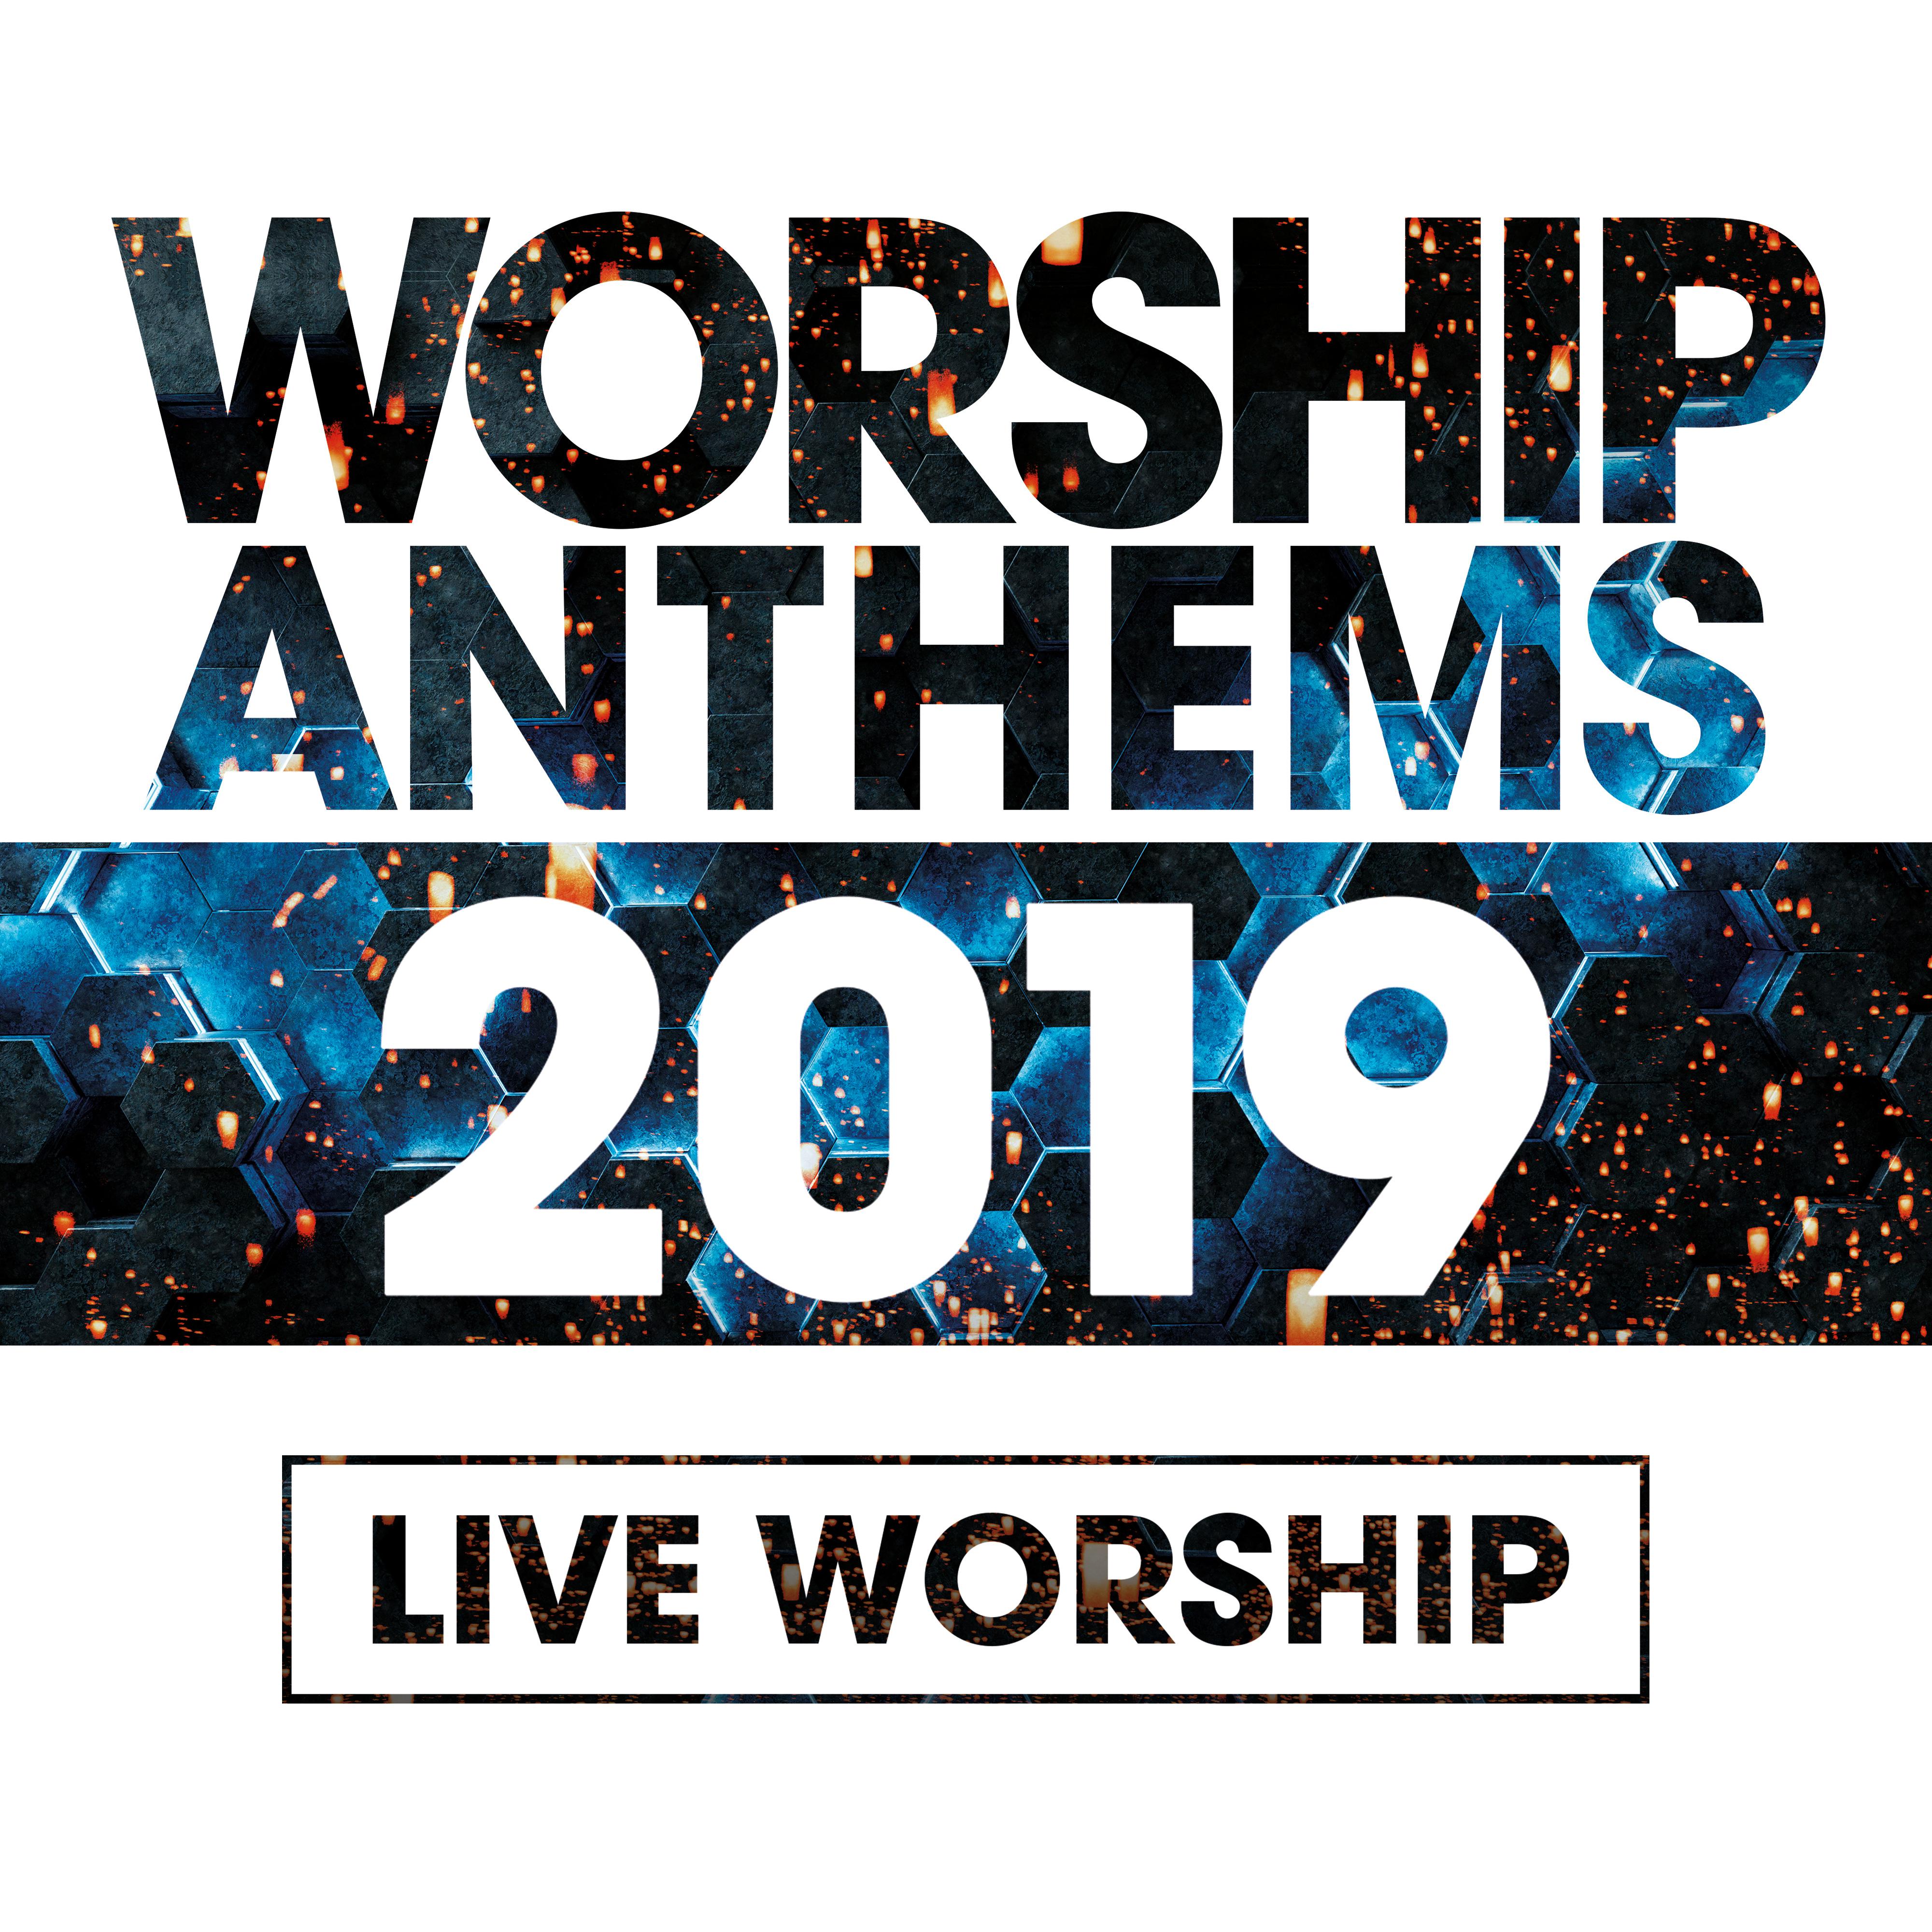 Come Holy Spirit (feat. Tom Smith) [Live]